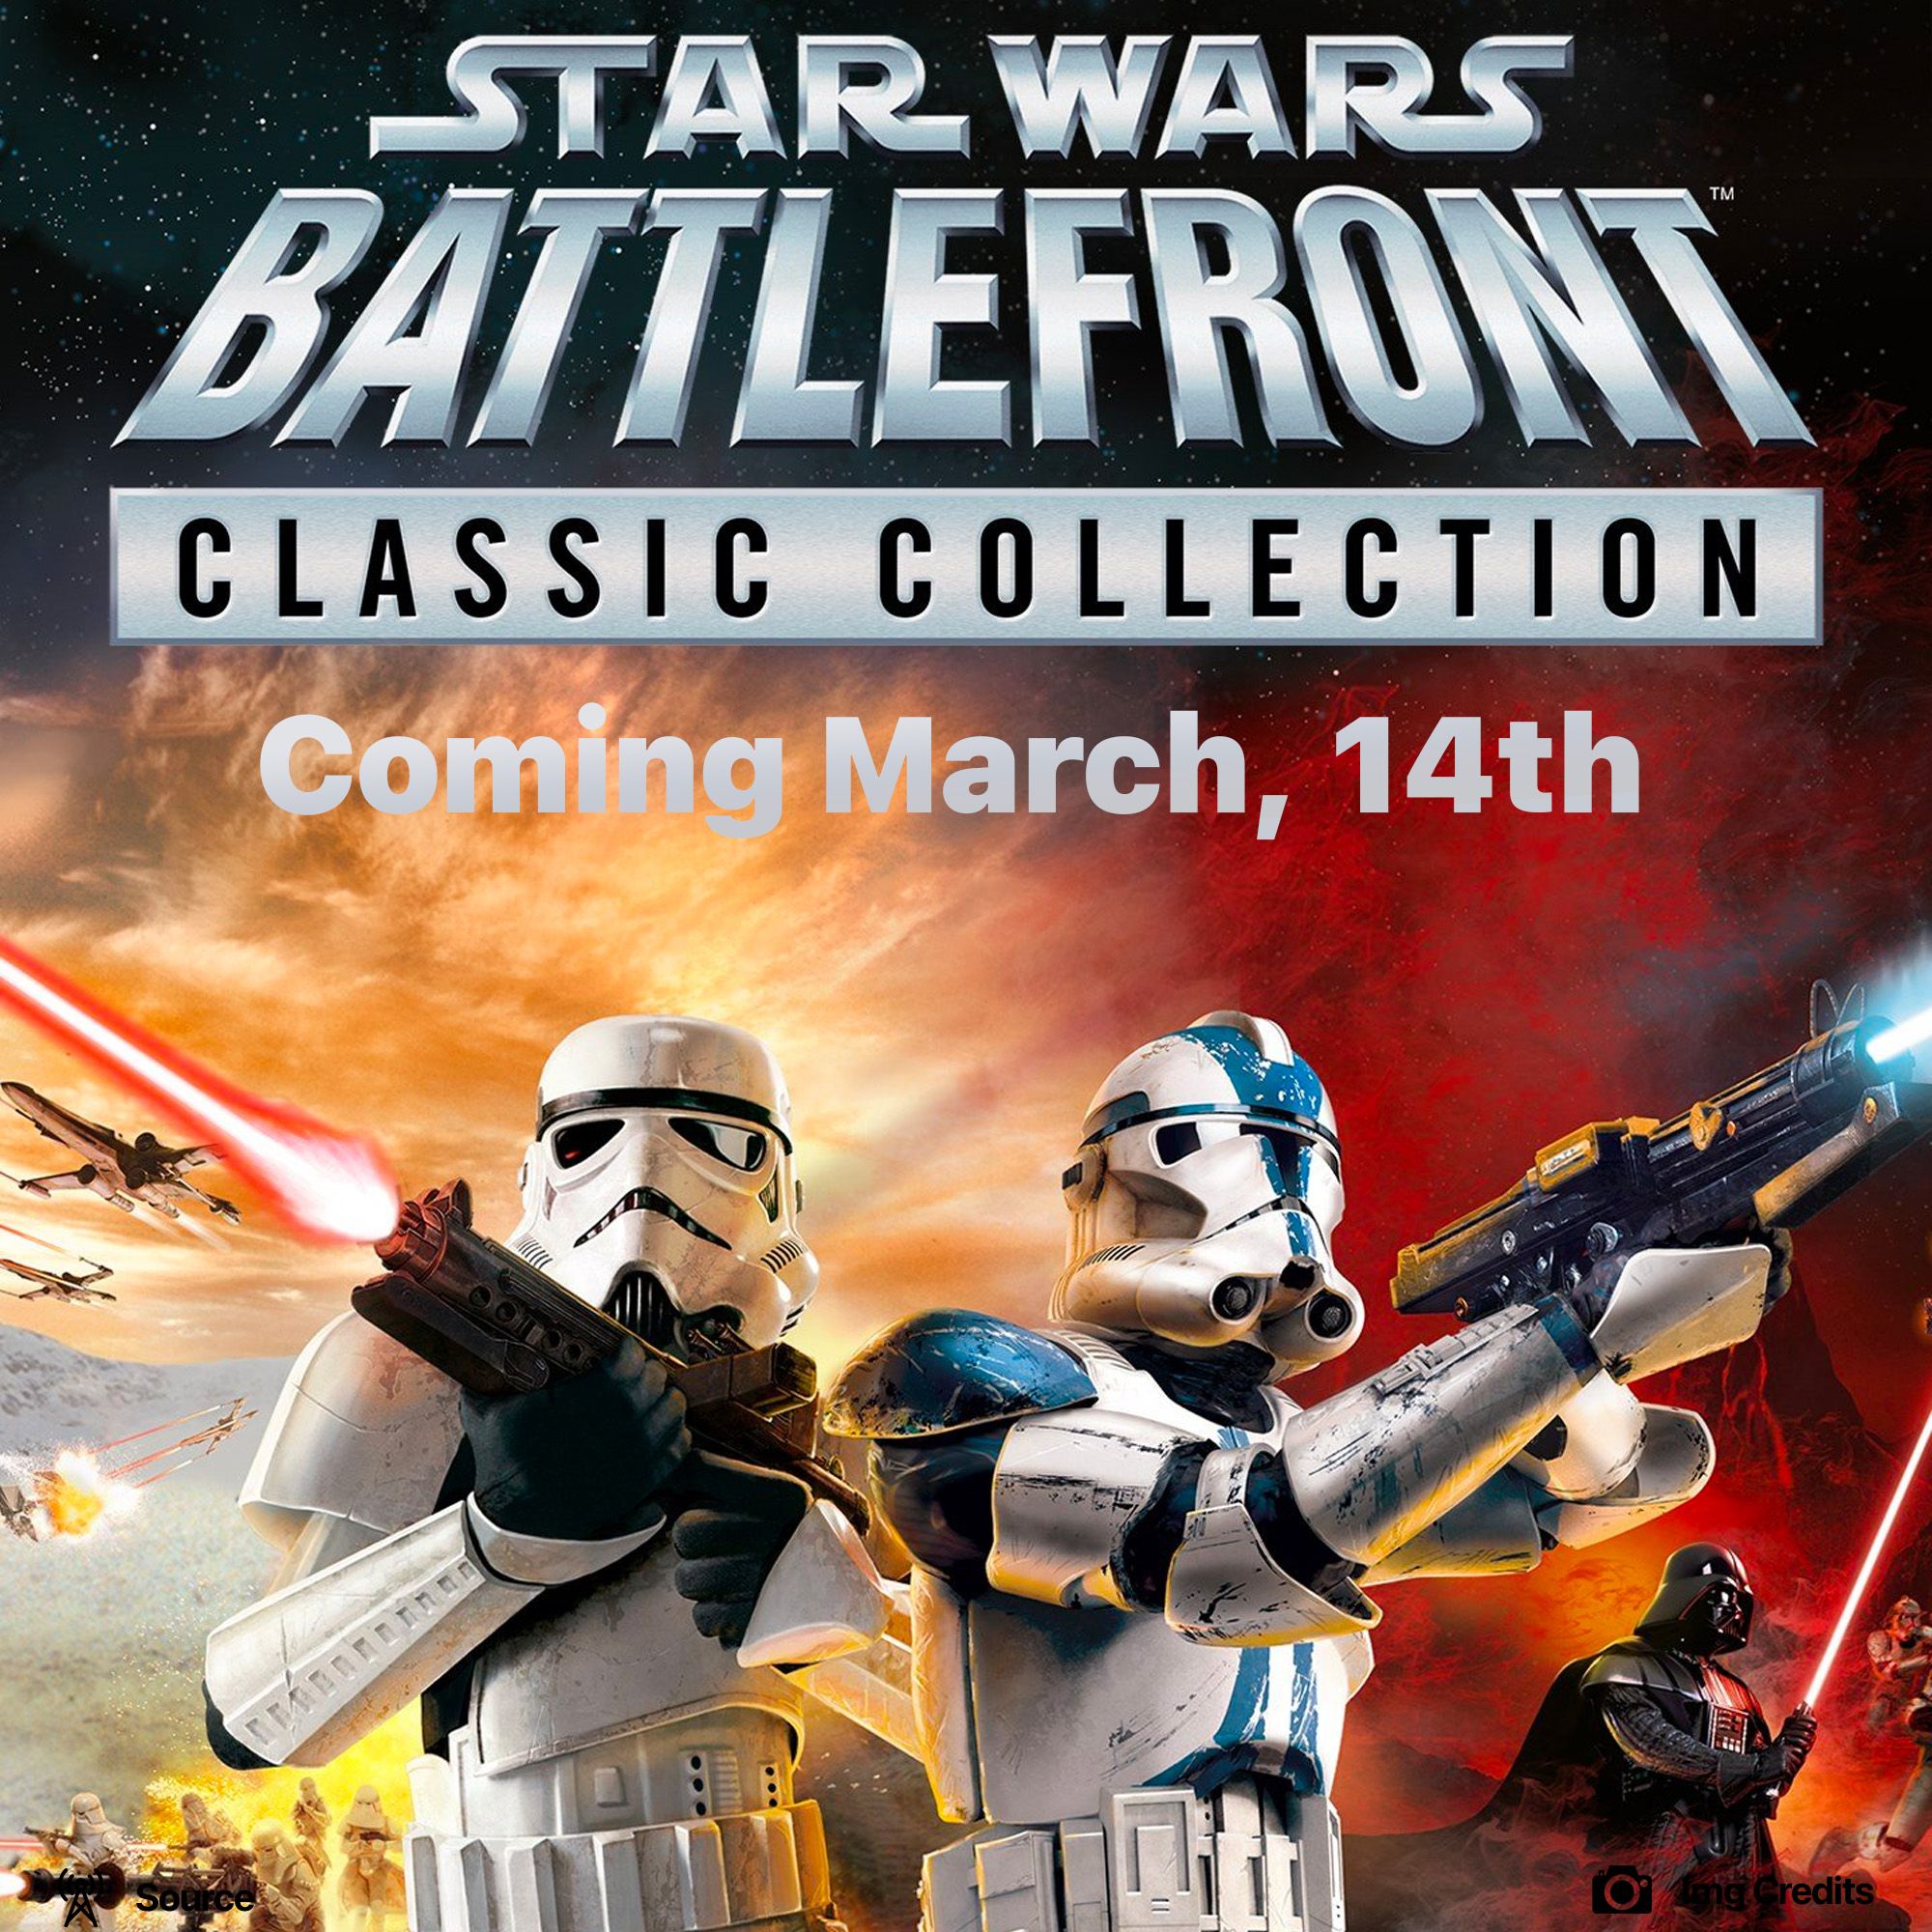 Classic Battlefront 1 & 2 are coming back on March 14th